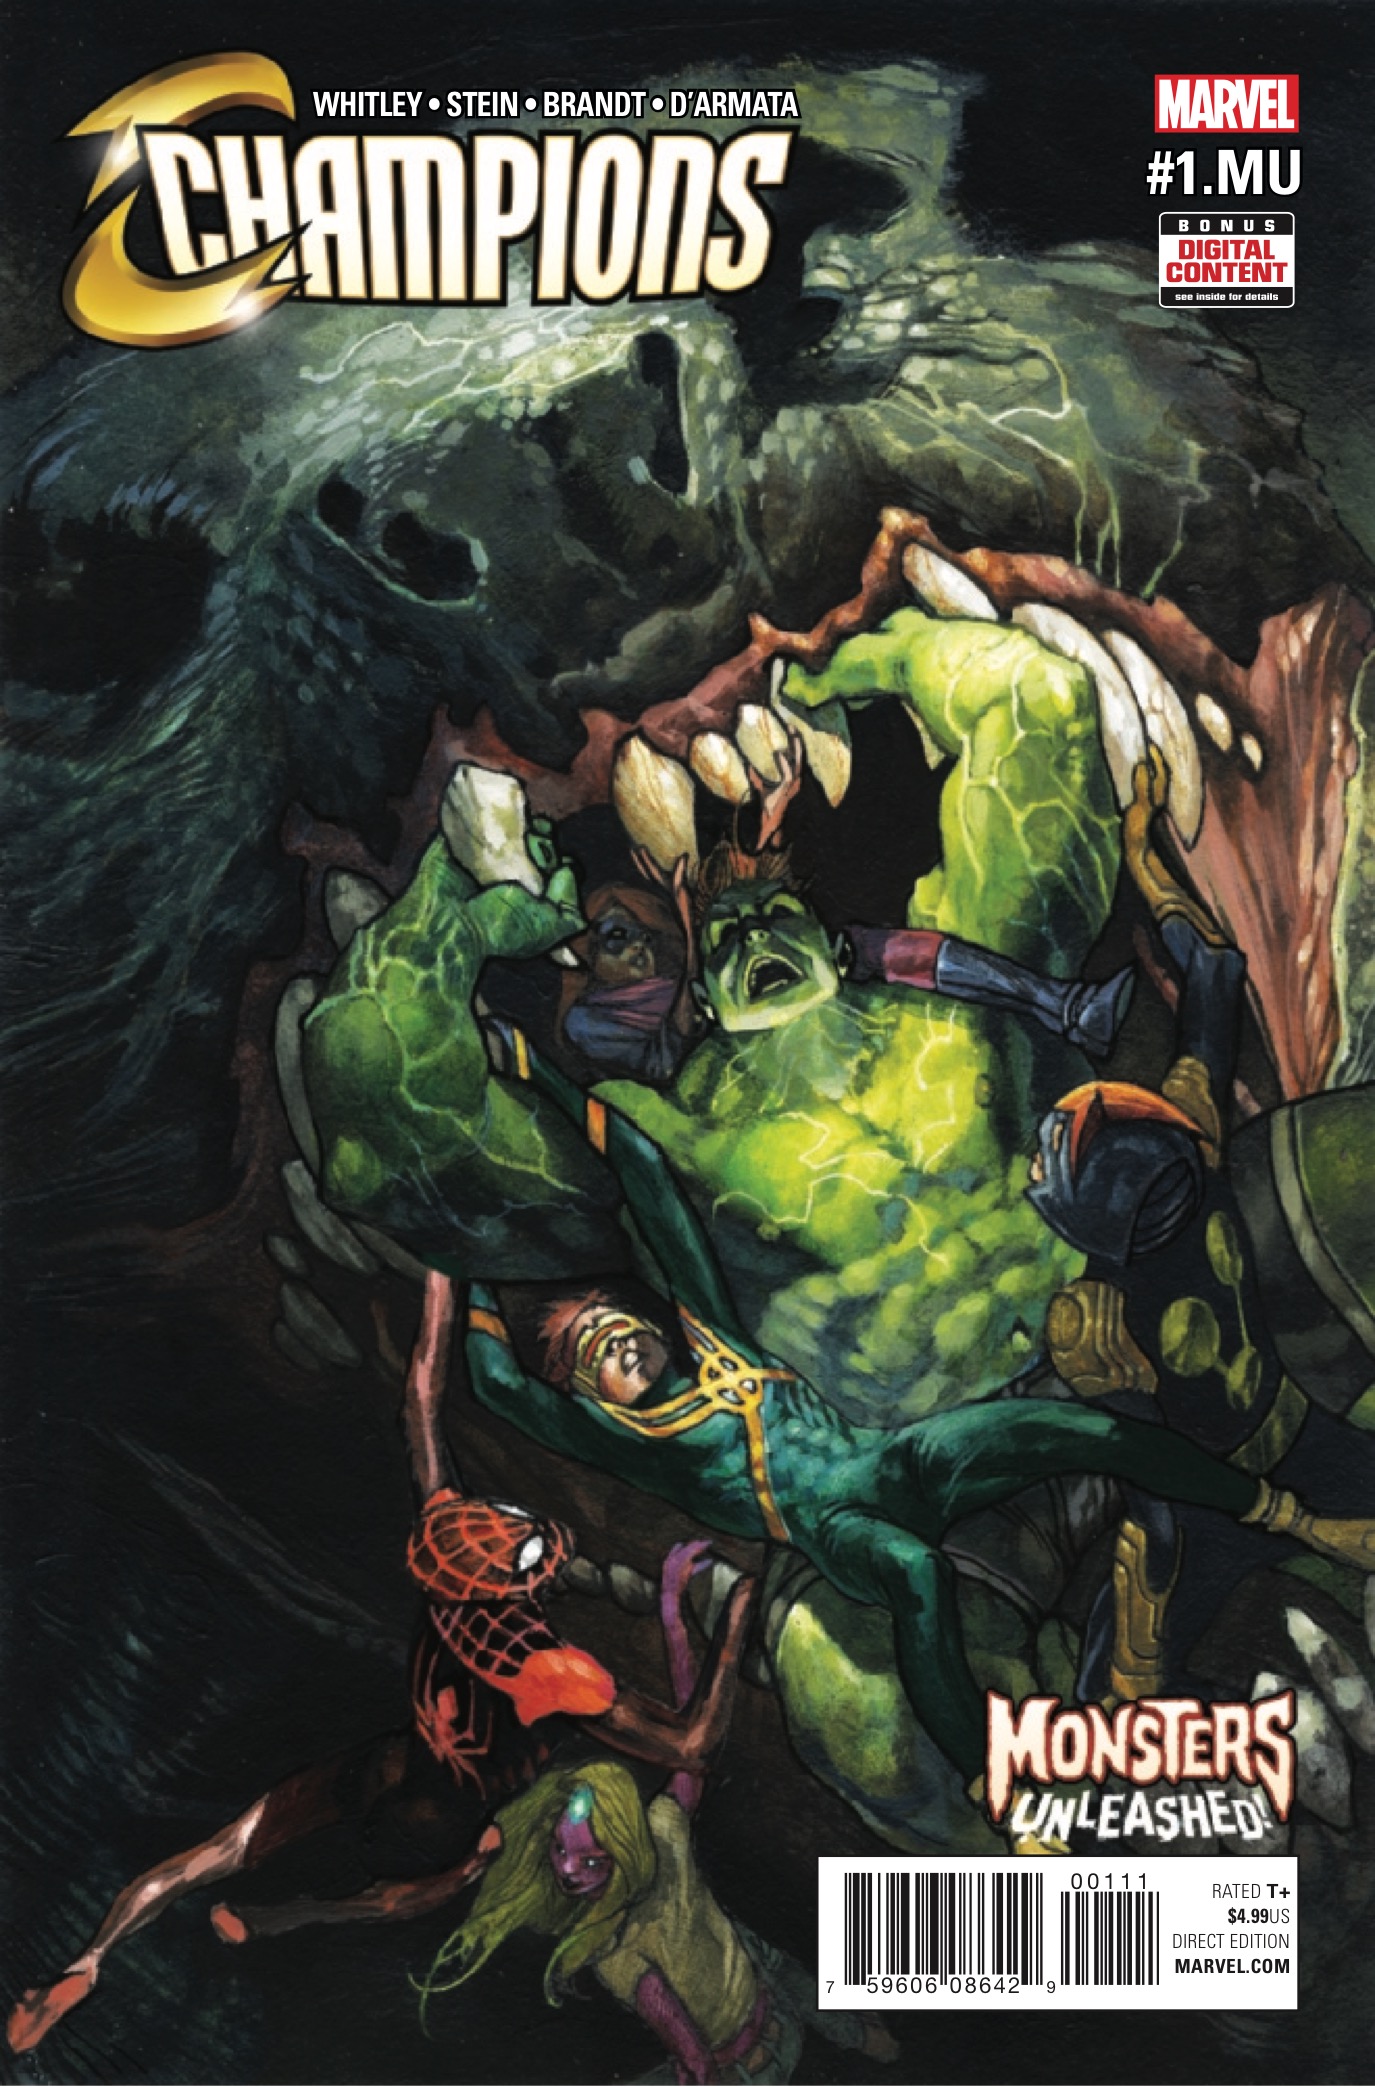 Marvel Preview: Champions #1.MU